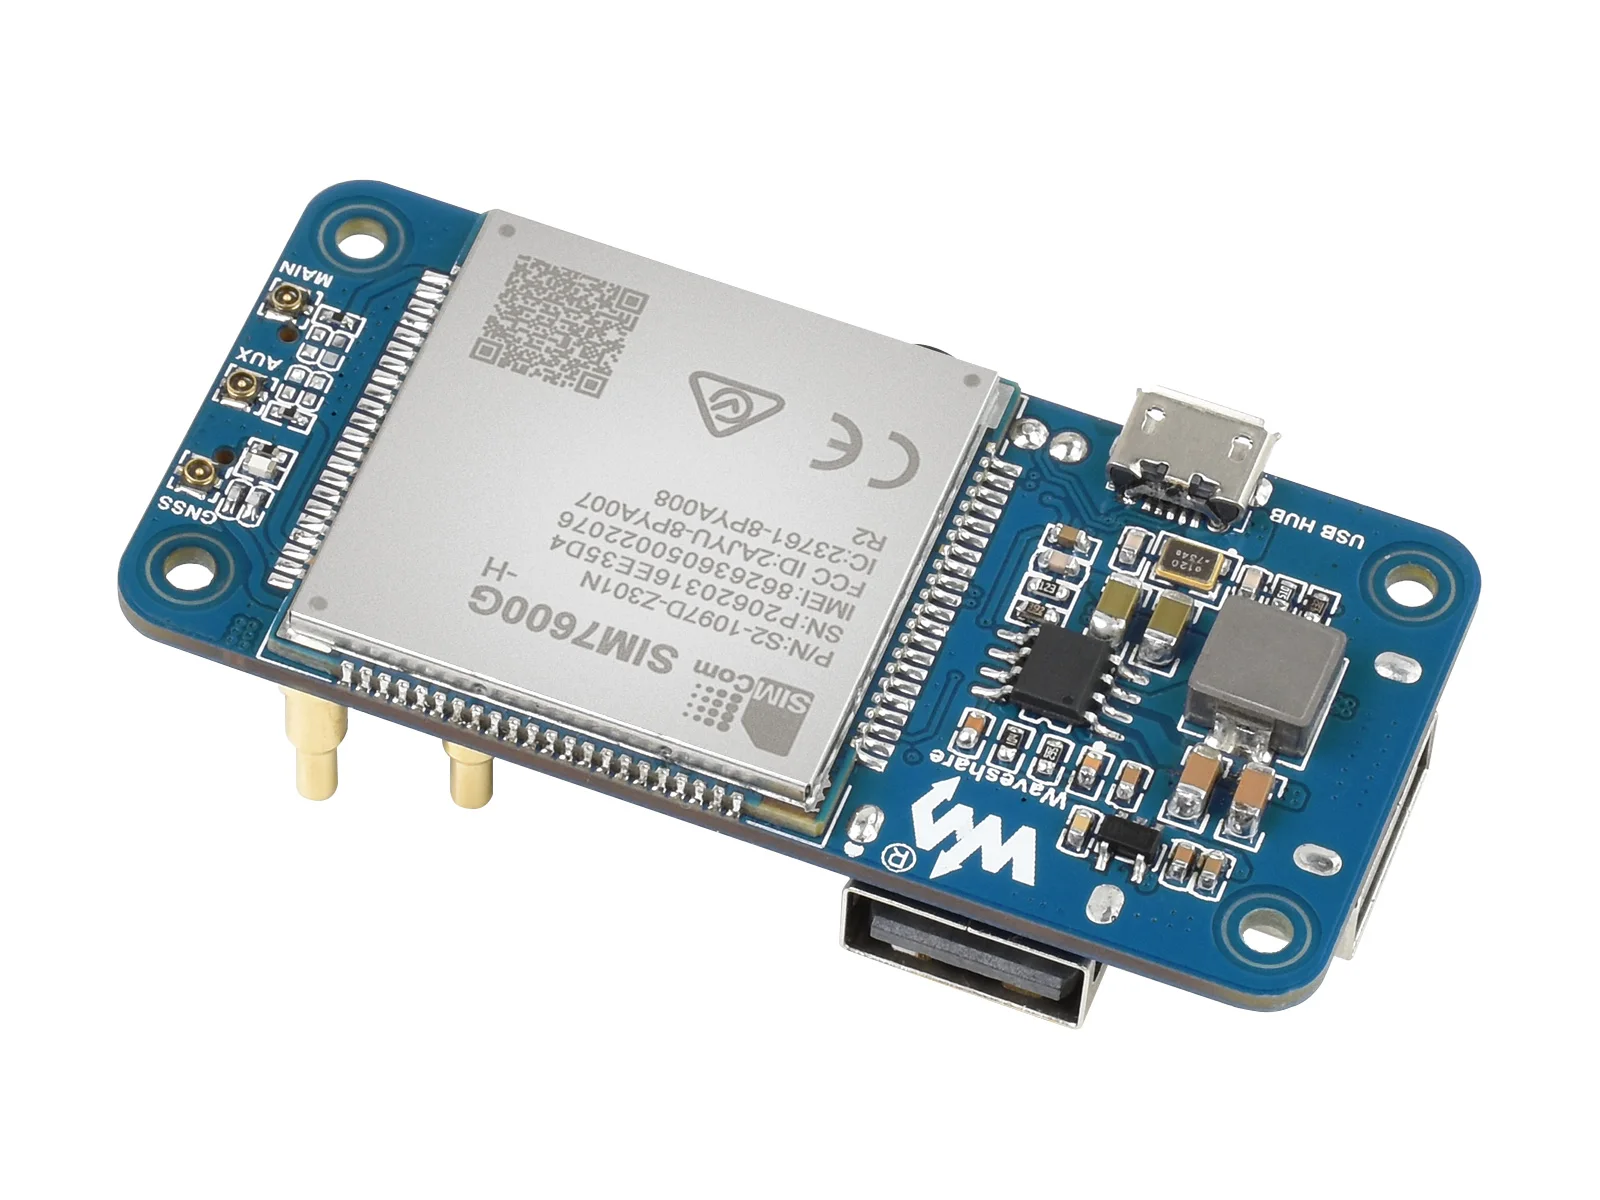 SIM7600G-H 4G HAT (B), RPi 4G Expansion Board Type B, Global Band, Compatible with 4G/3G/2G, GNSS positioning, low power consumption